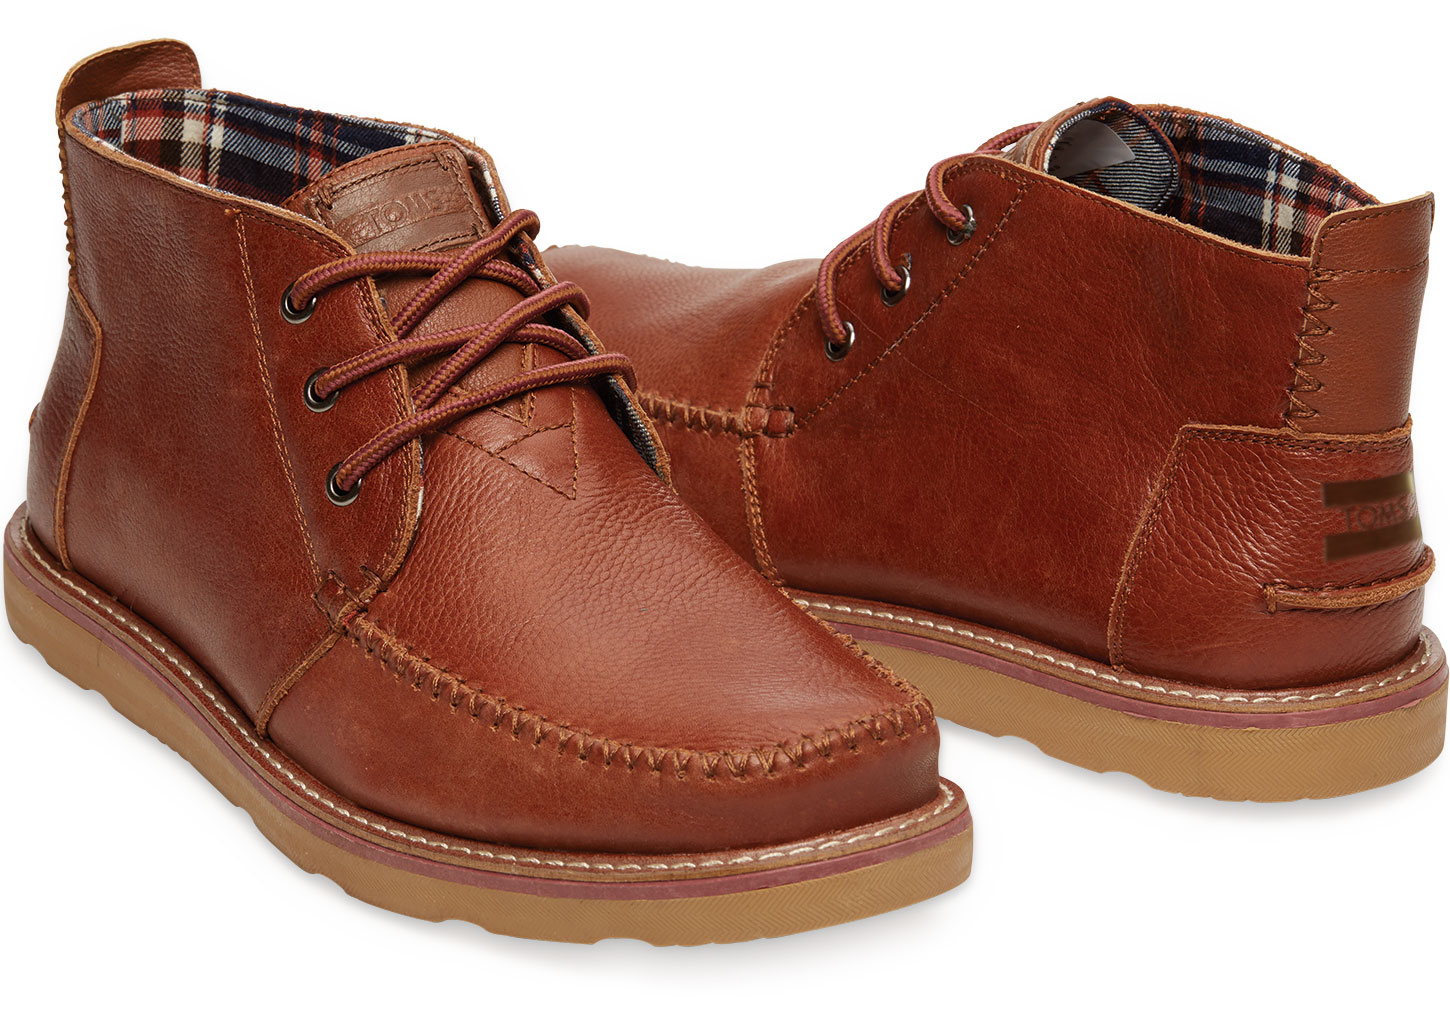 Lyst - Toms Brown Leather Men'S Chukka Boots in Brown for Men